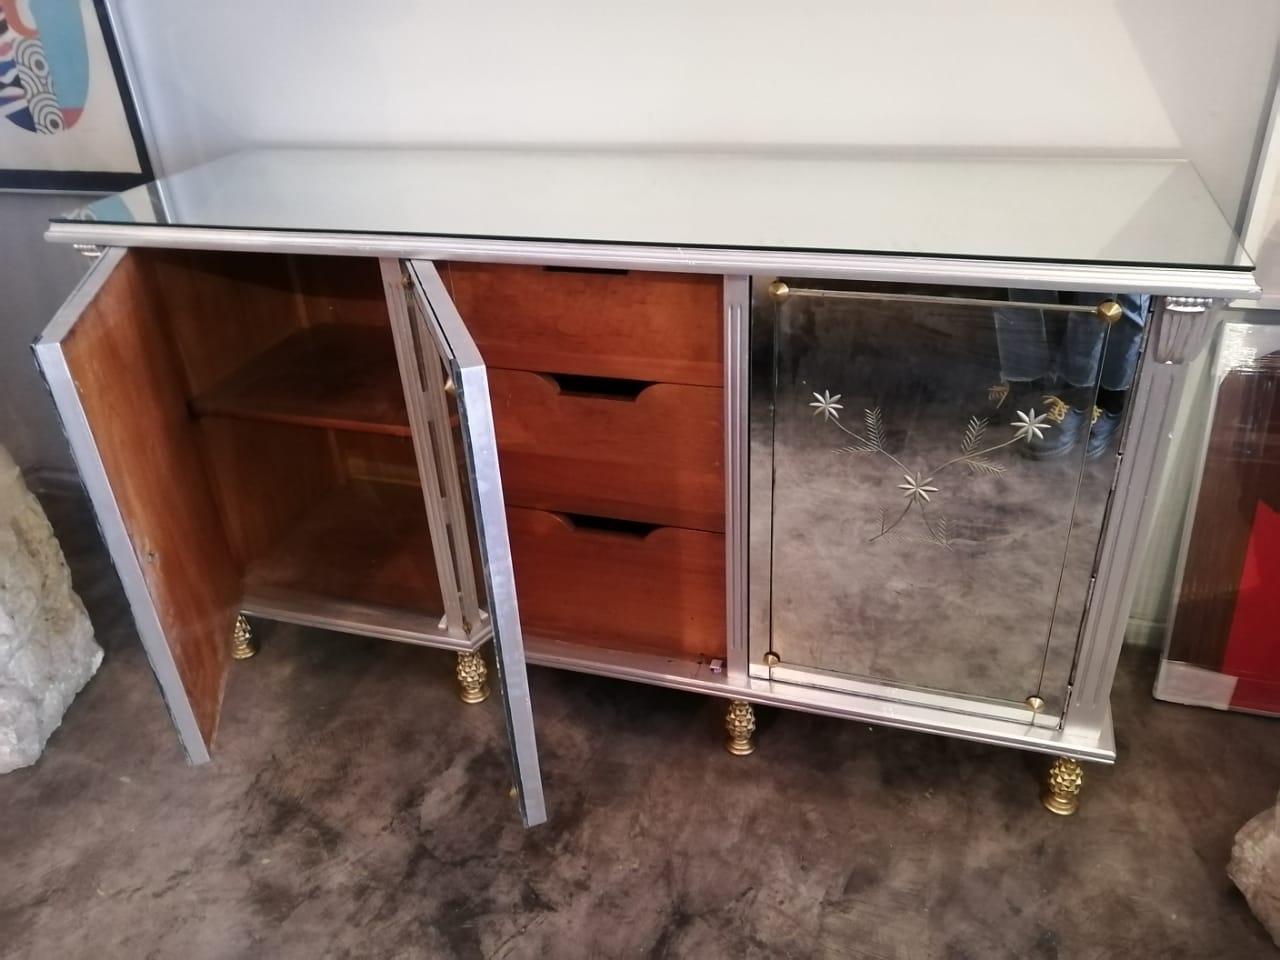 Arturo Pani Silver Wood and Mirrors Credenza In Good Condition For Sale In Mexico City, MX